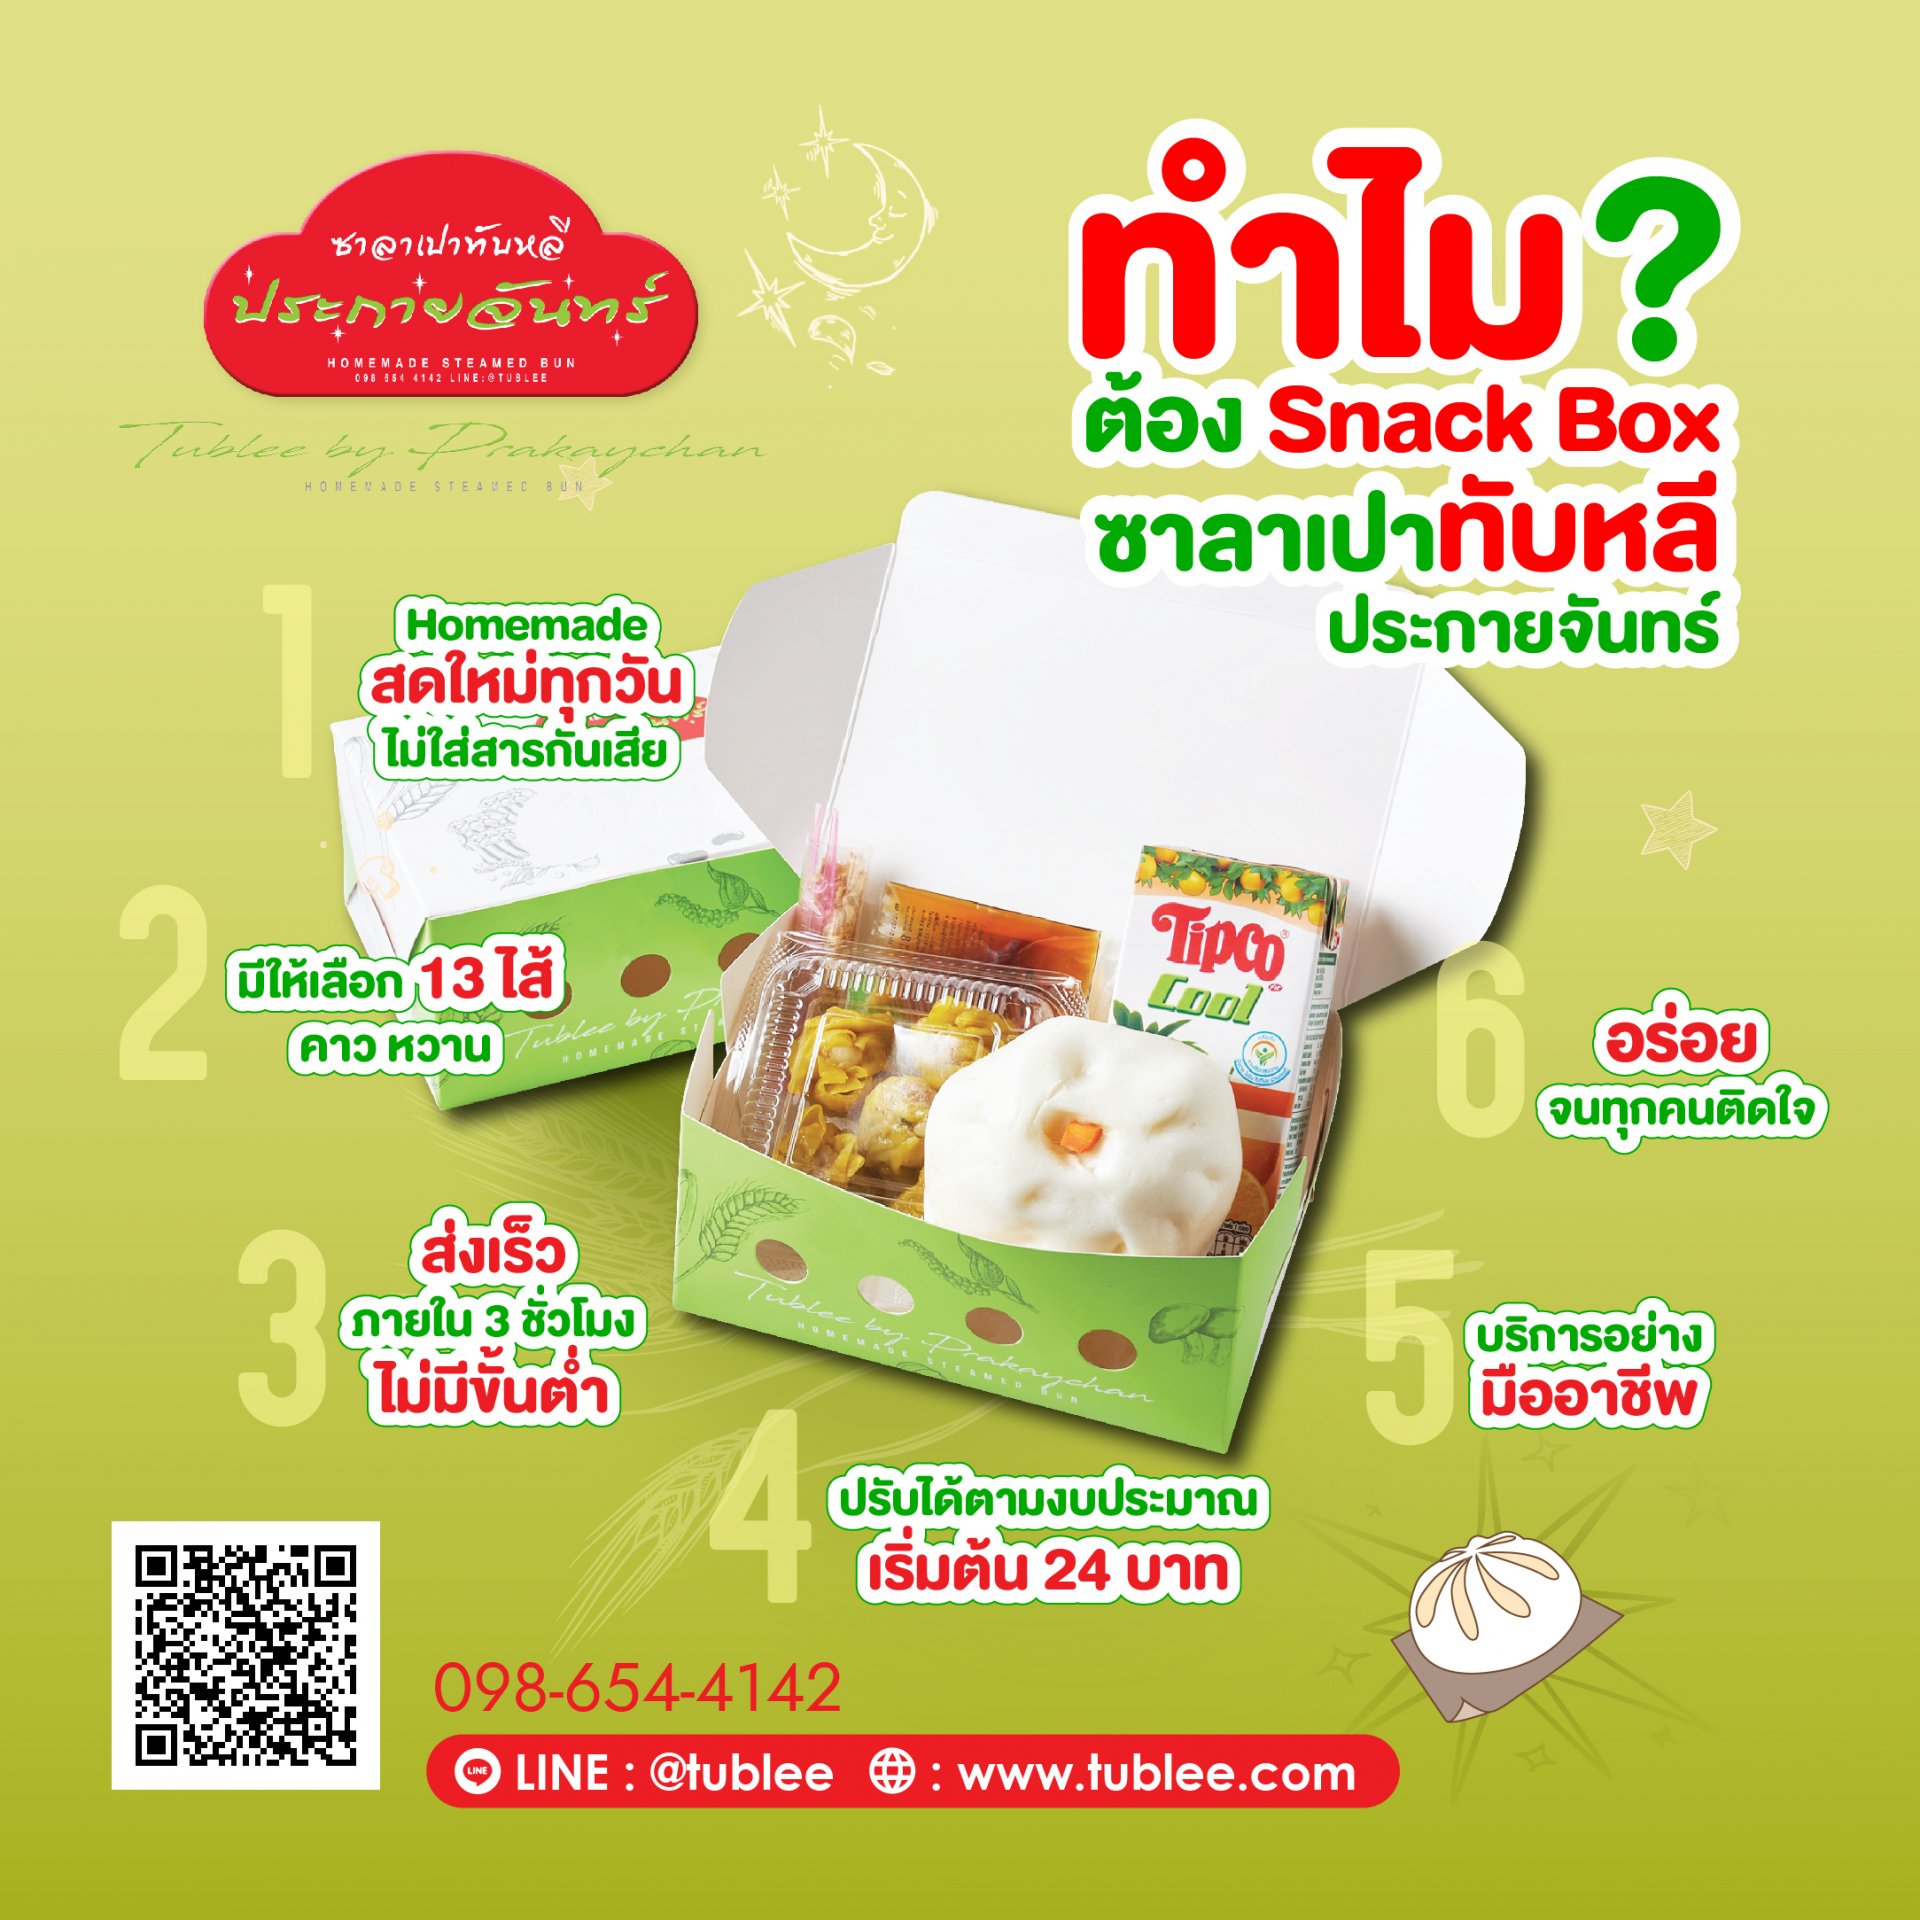 why snack box tublee